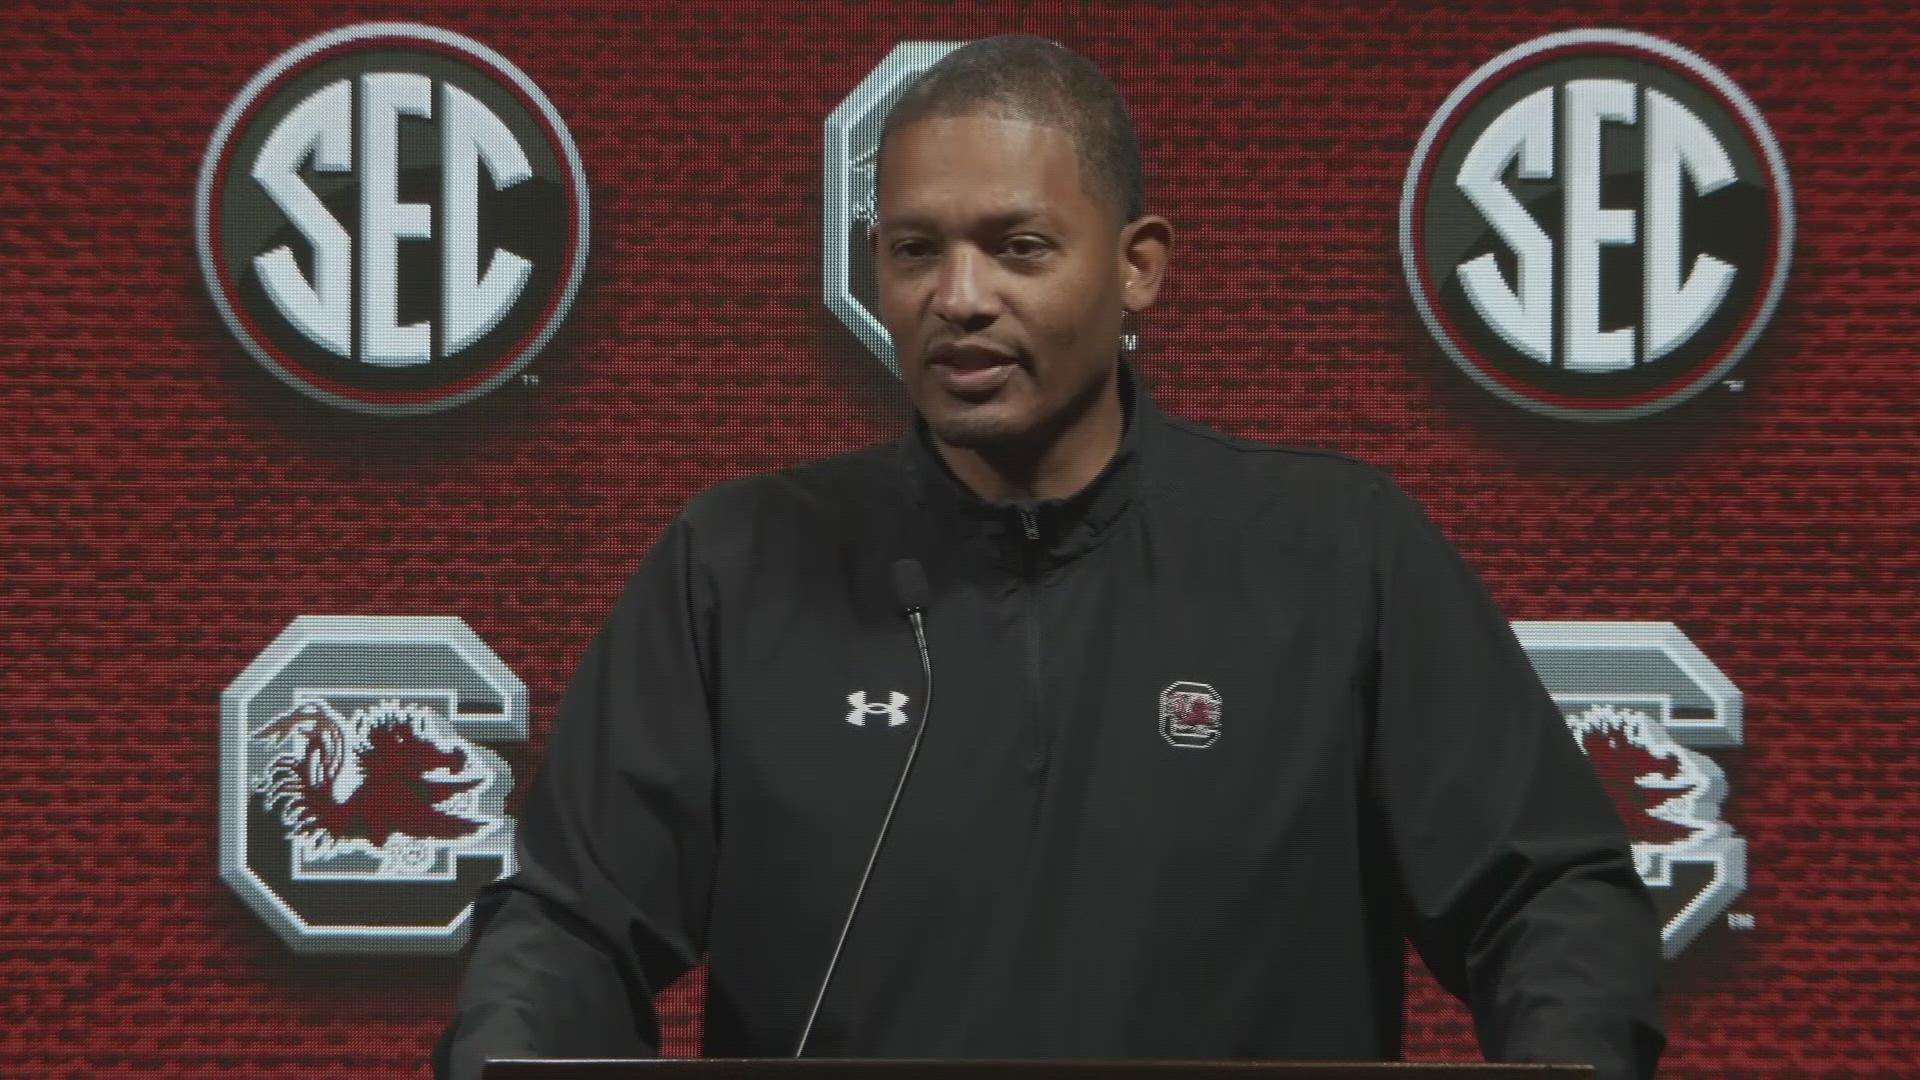 South Carolina head basketball coach Lamont Paris reacts to his team being picked to finish last in the SEC.